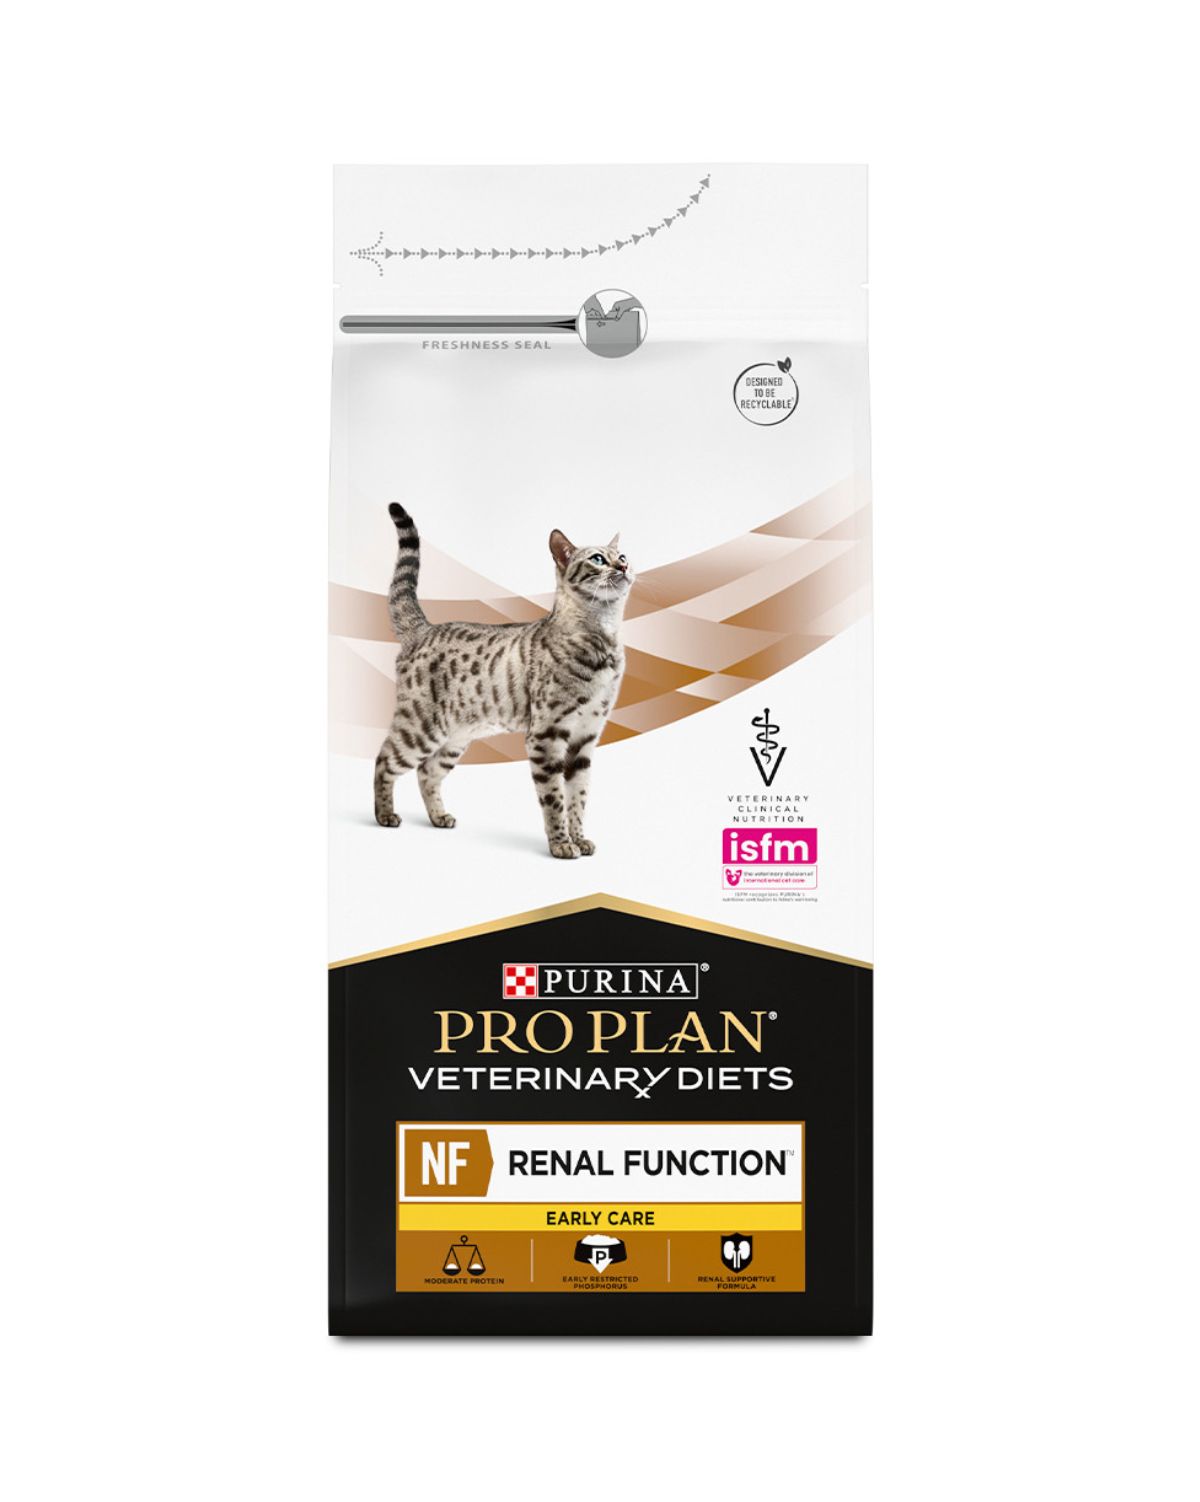 Pro Plan Renal Function Early Care Gato - Vet Diets NF